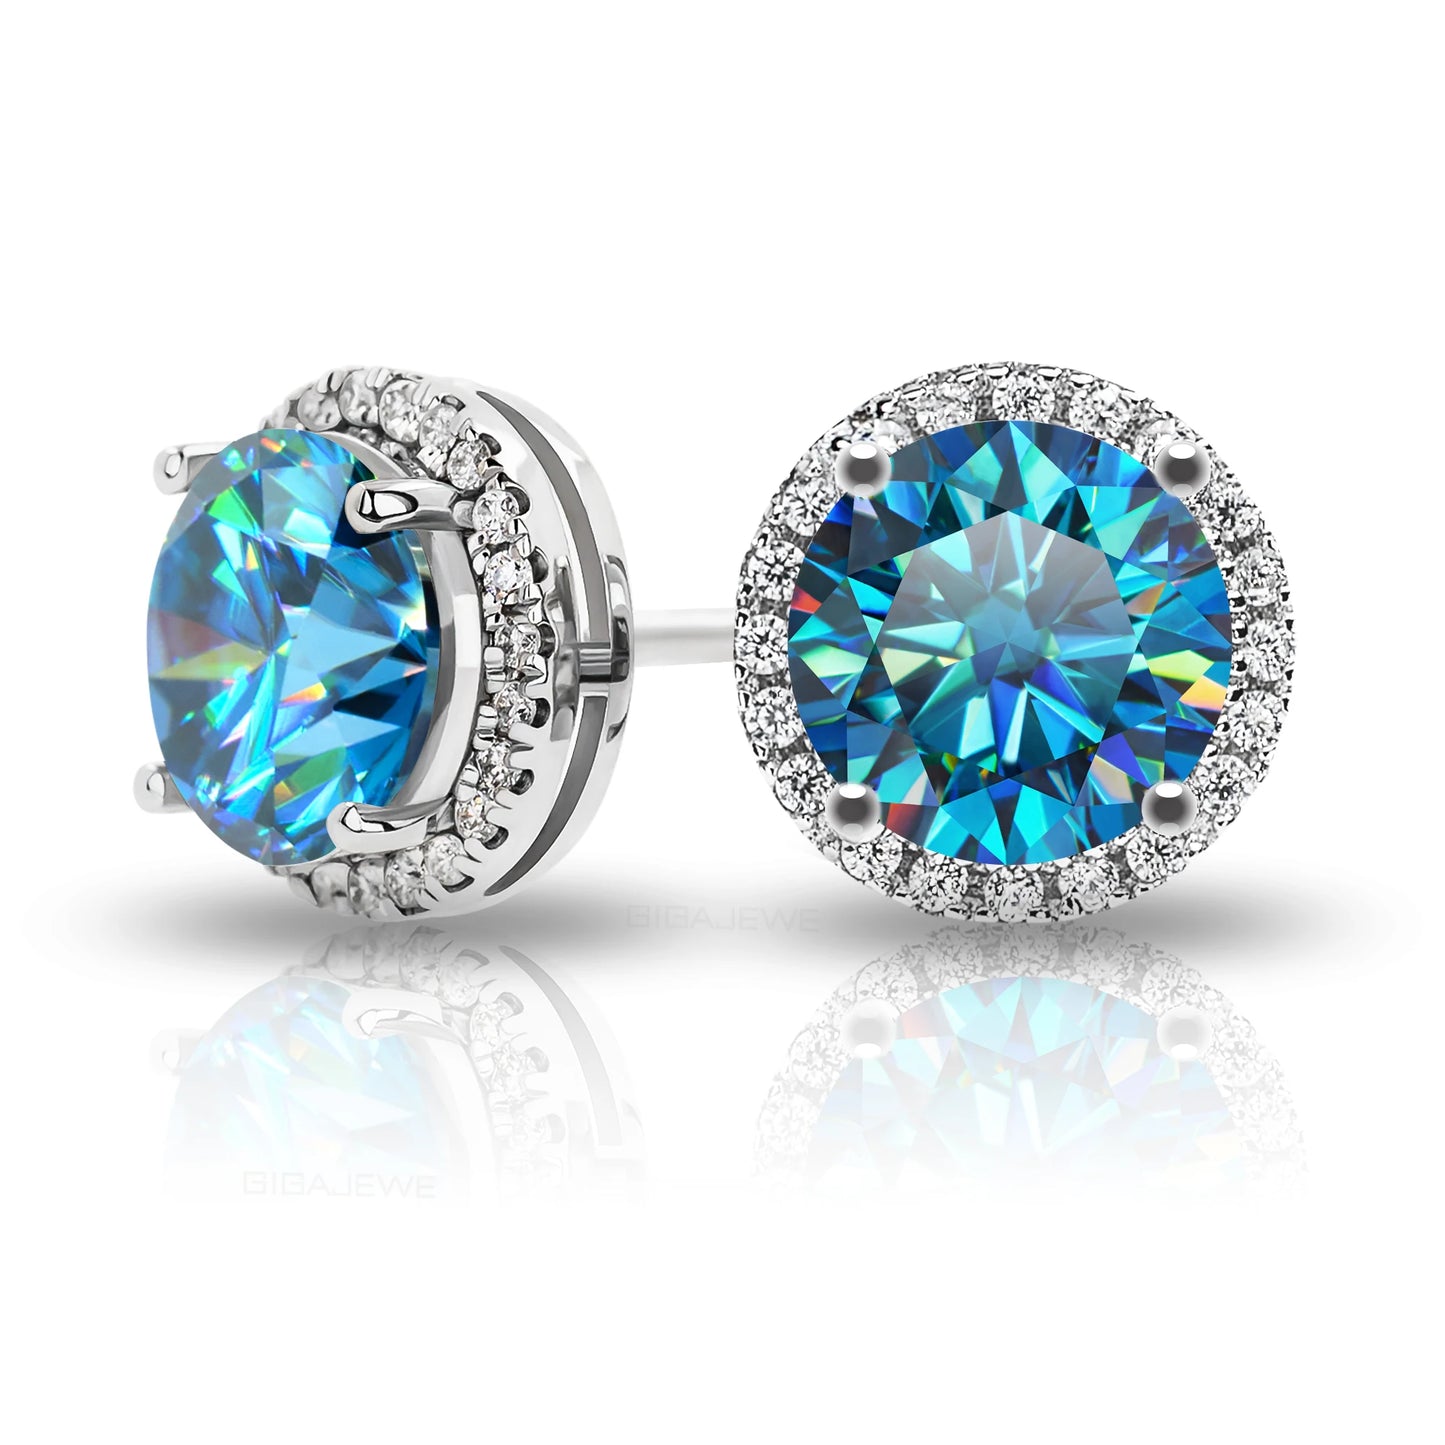 GIGAJEWE Moissanite Hot Selling Items Earrings D Color VVS1 S925 Silver 18K Gold Plated Jewelry Woman Gift NovaColor Blue